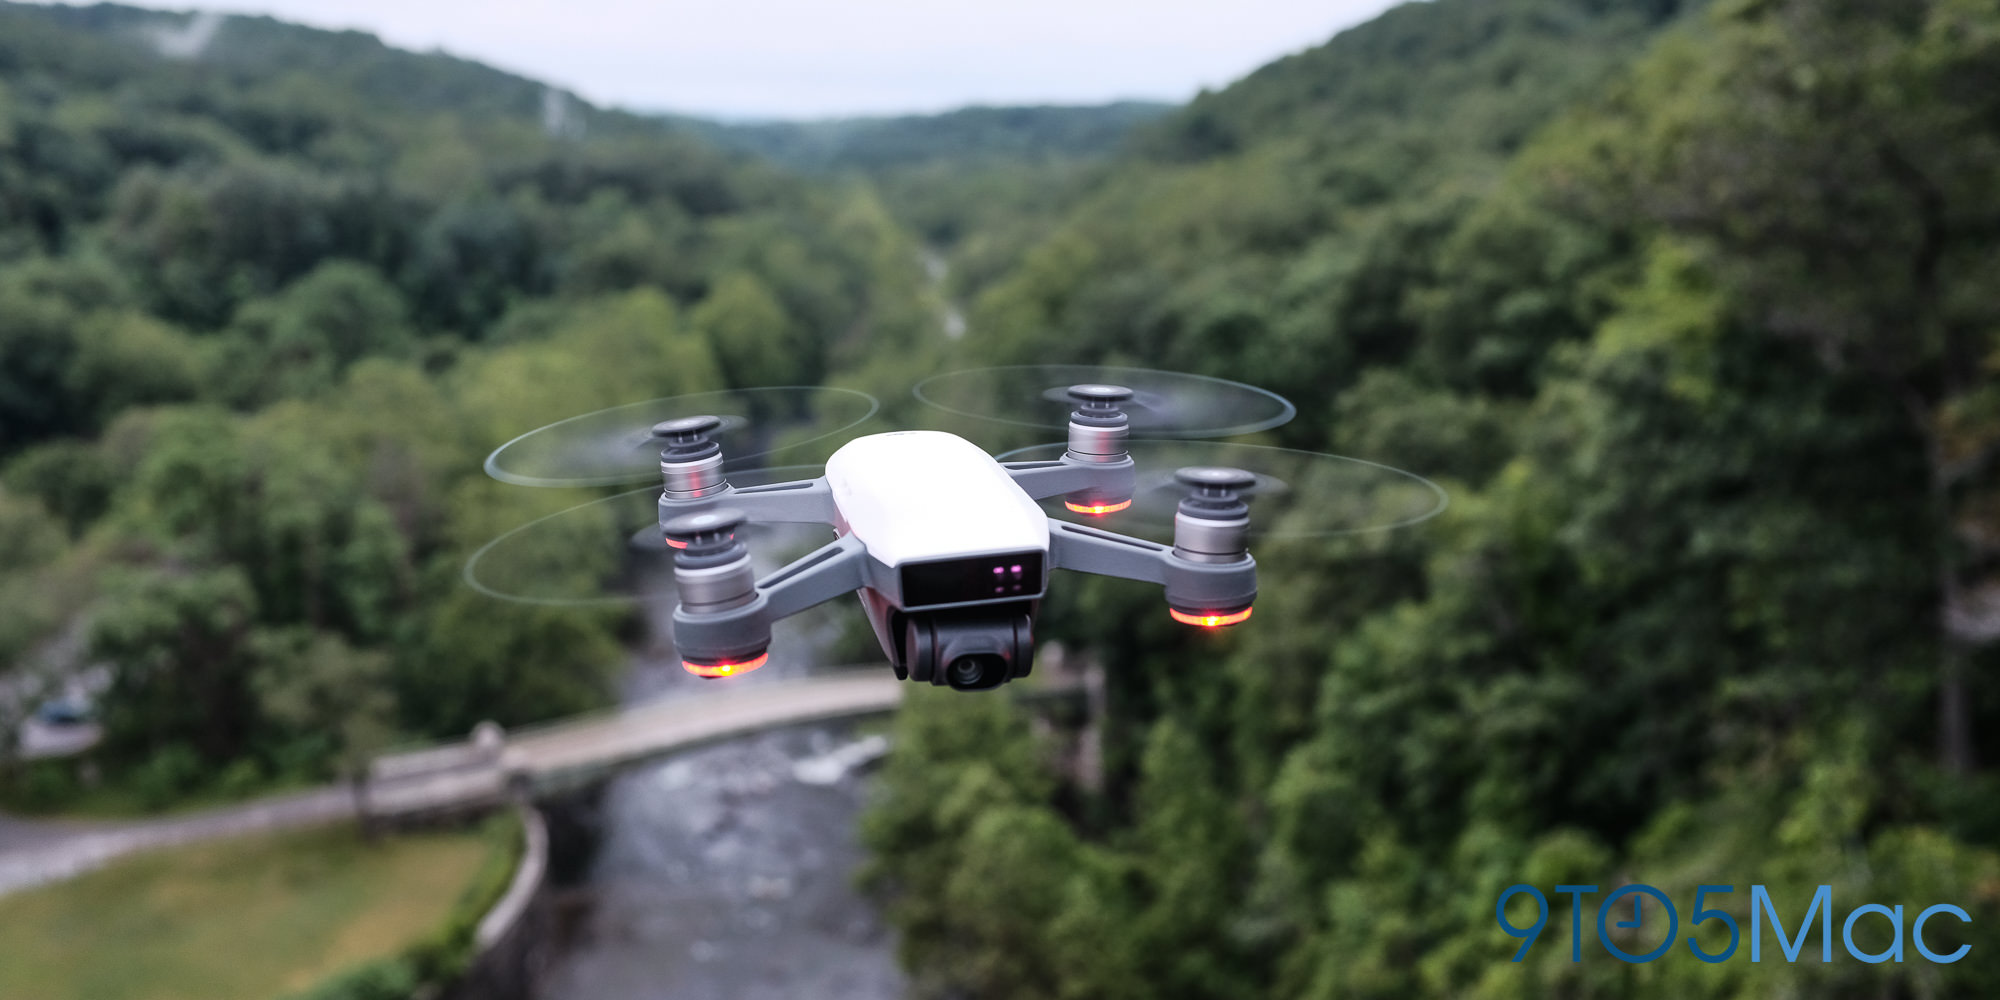 tegnebog ler Trafikprop First Impression, Hands-on: The new DJI Spark drone is small, fast and  nimble - 9to5Mac